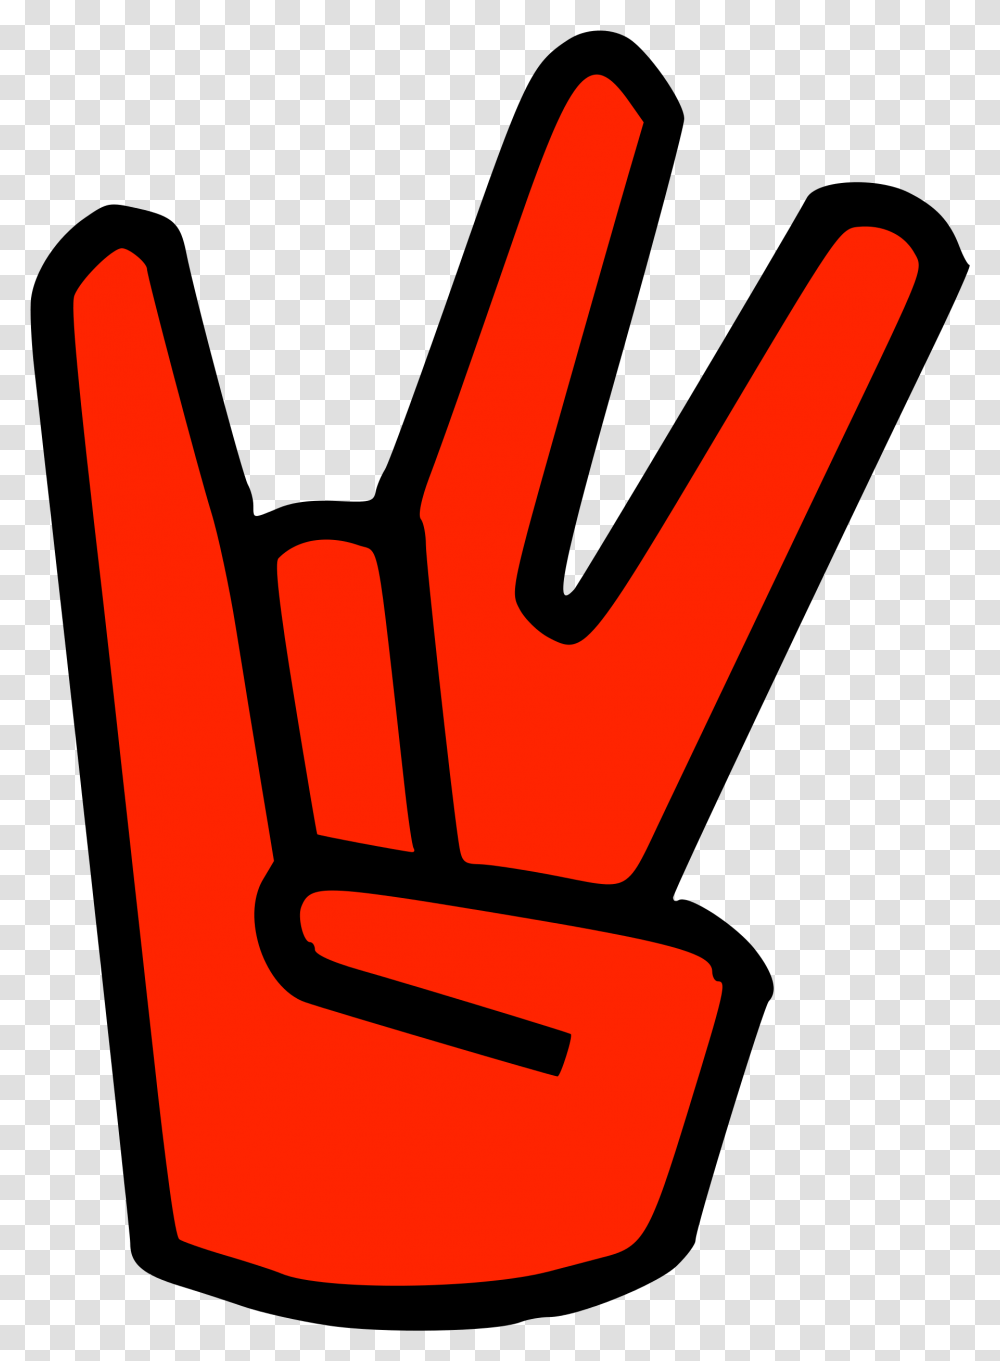 Cougar Paw University Of Houston Cougar Sign, Dynamite, Bomb, Weapon, Weaponry Transparent Png